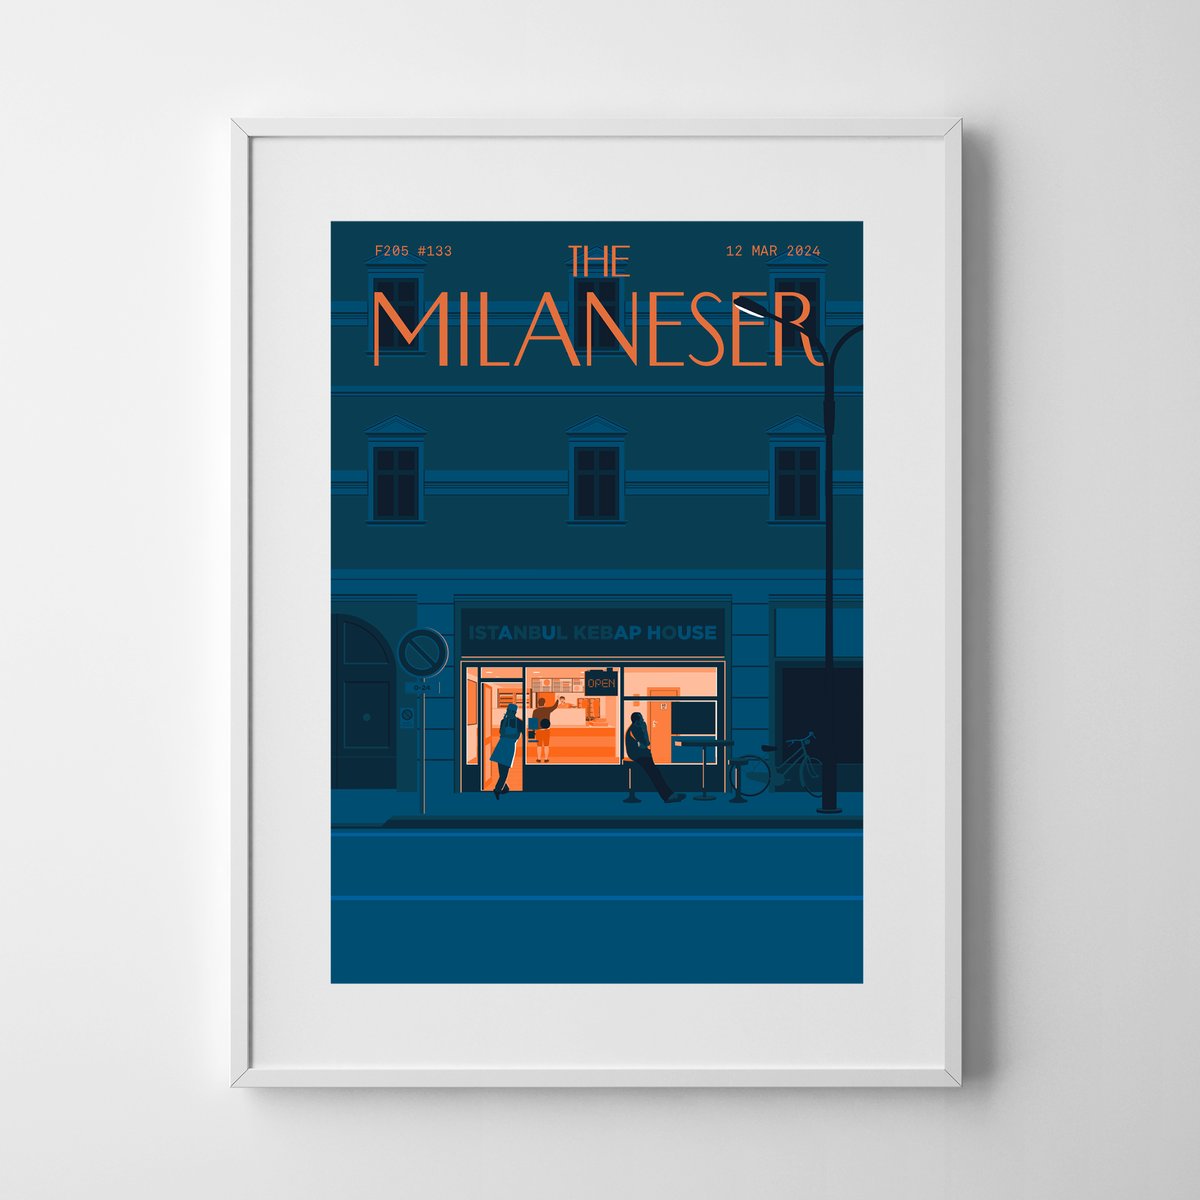 Image of The Milaneser #133